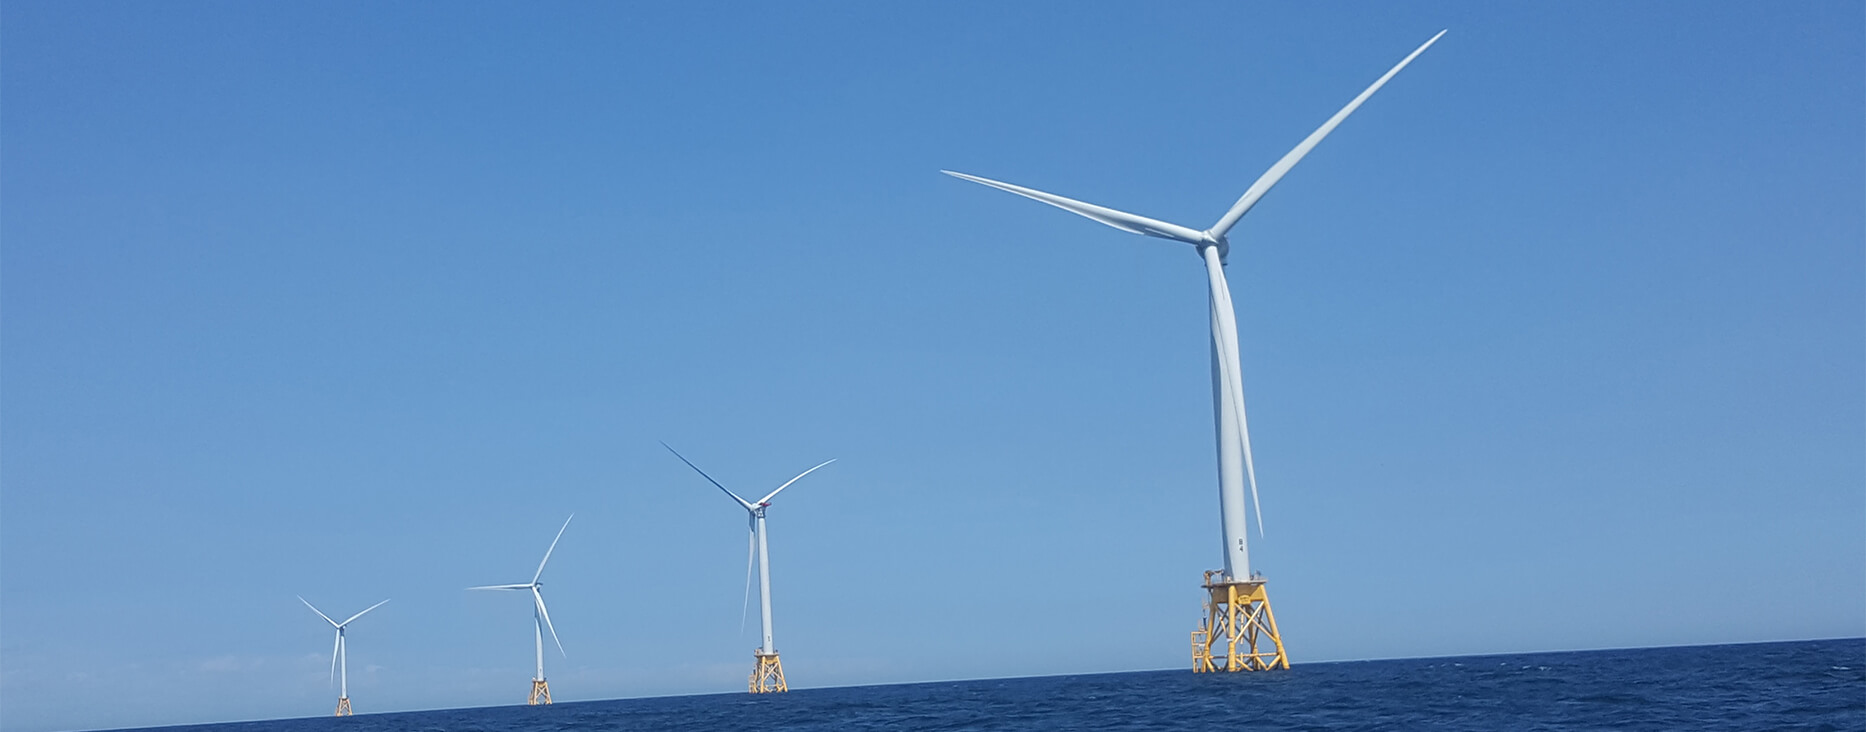 RFP: Offshore Wind Industry Cluster Development featured image.